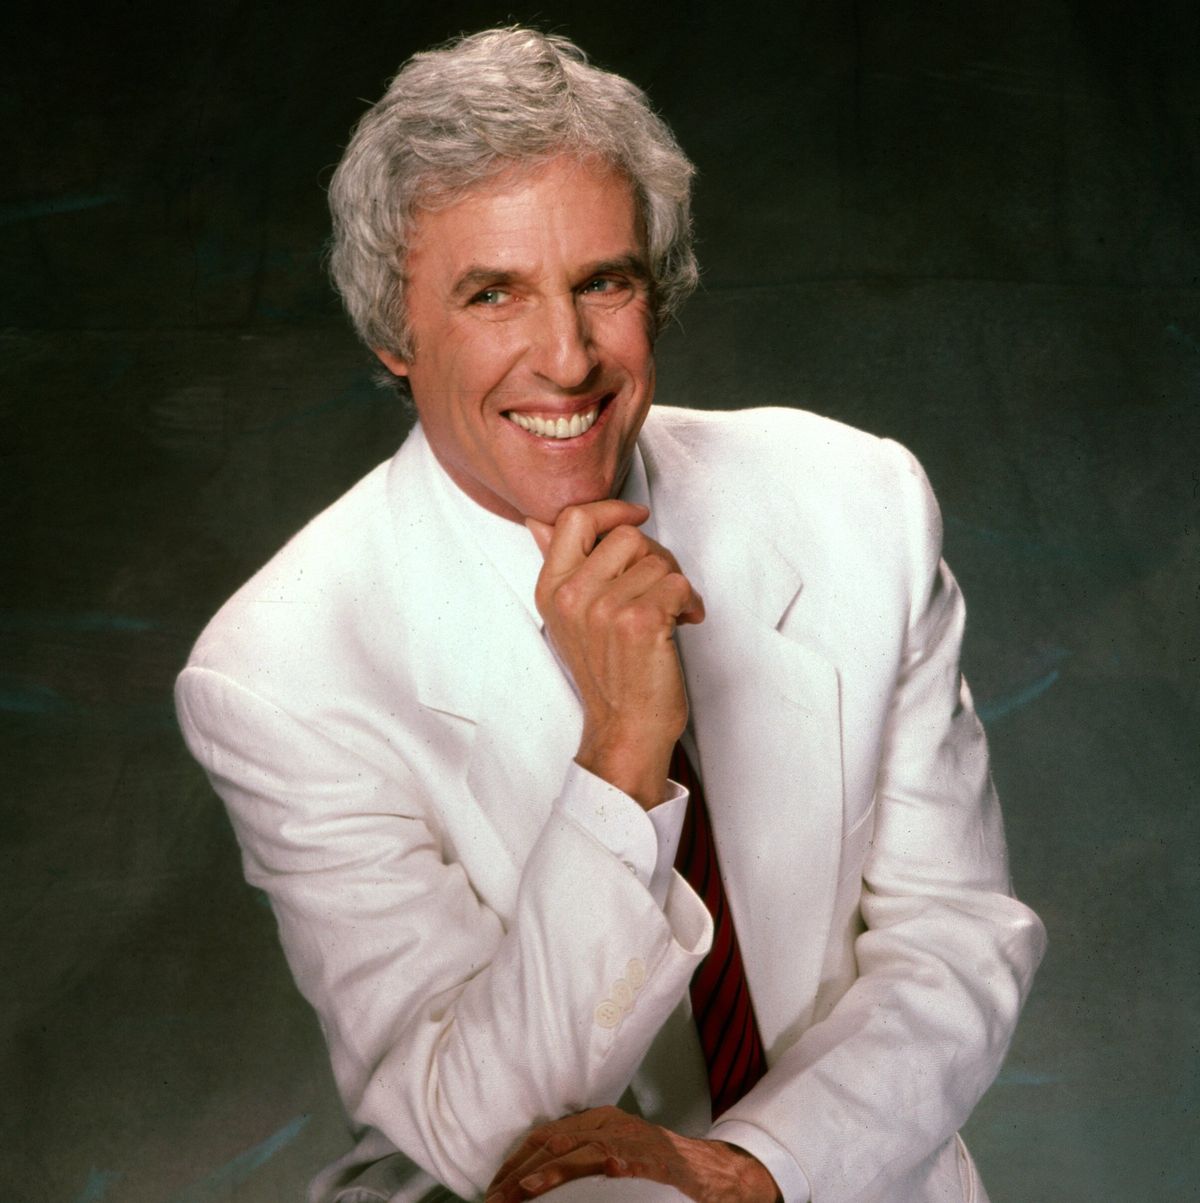 burt bacharach portrait shows the musician sitting on a stool in an all white suit with a red and blue striped tie, his right elbow is leaning on his leg and his right hand is resting underneath his chin, he smiles and looks to the right